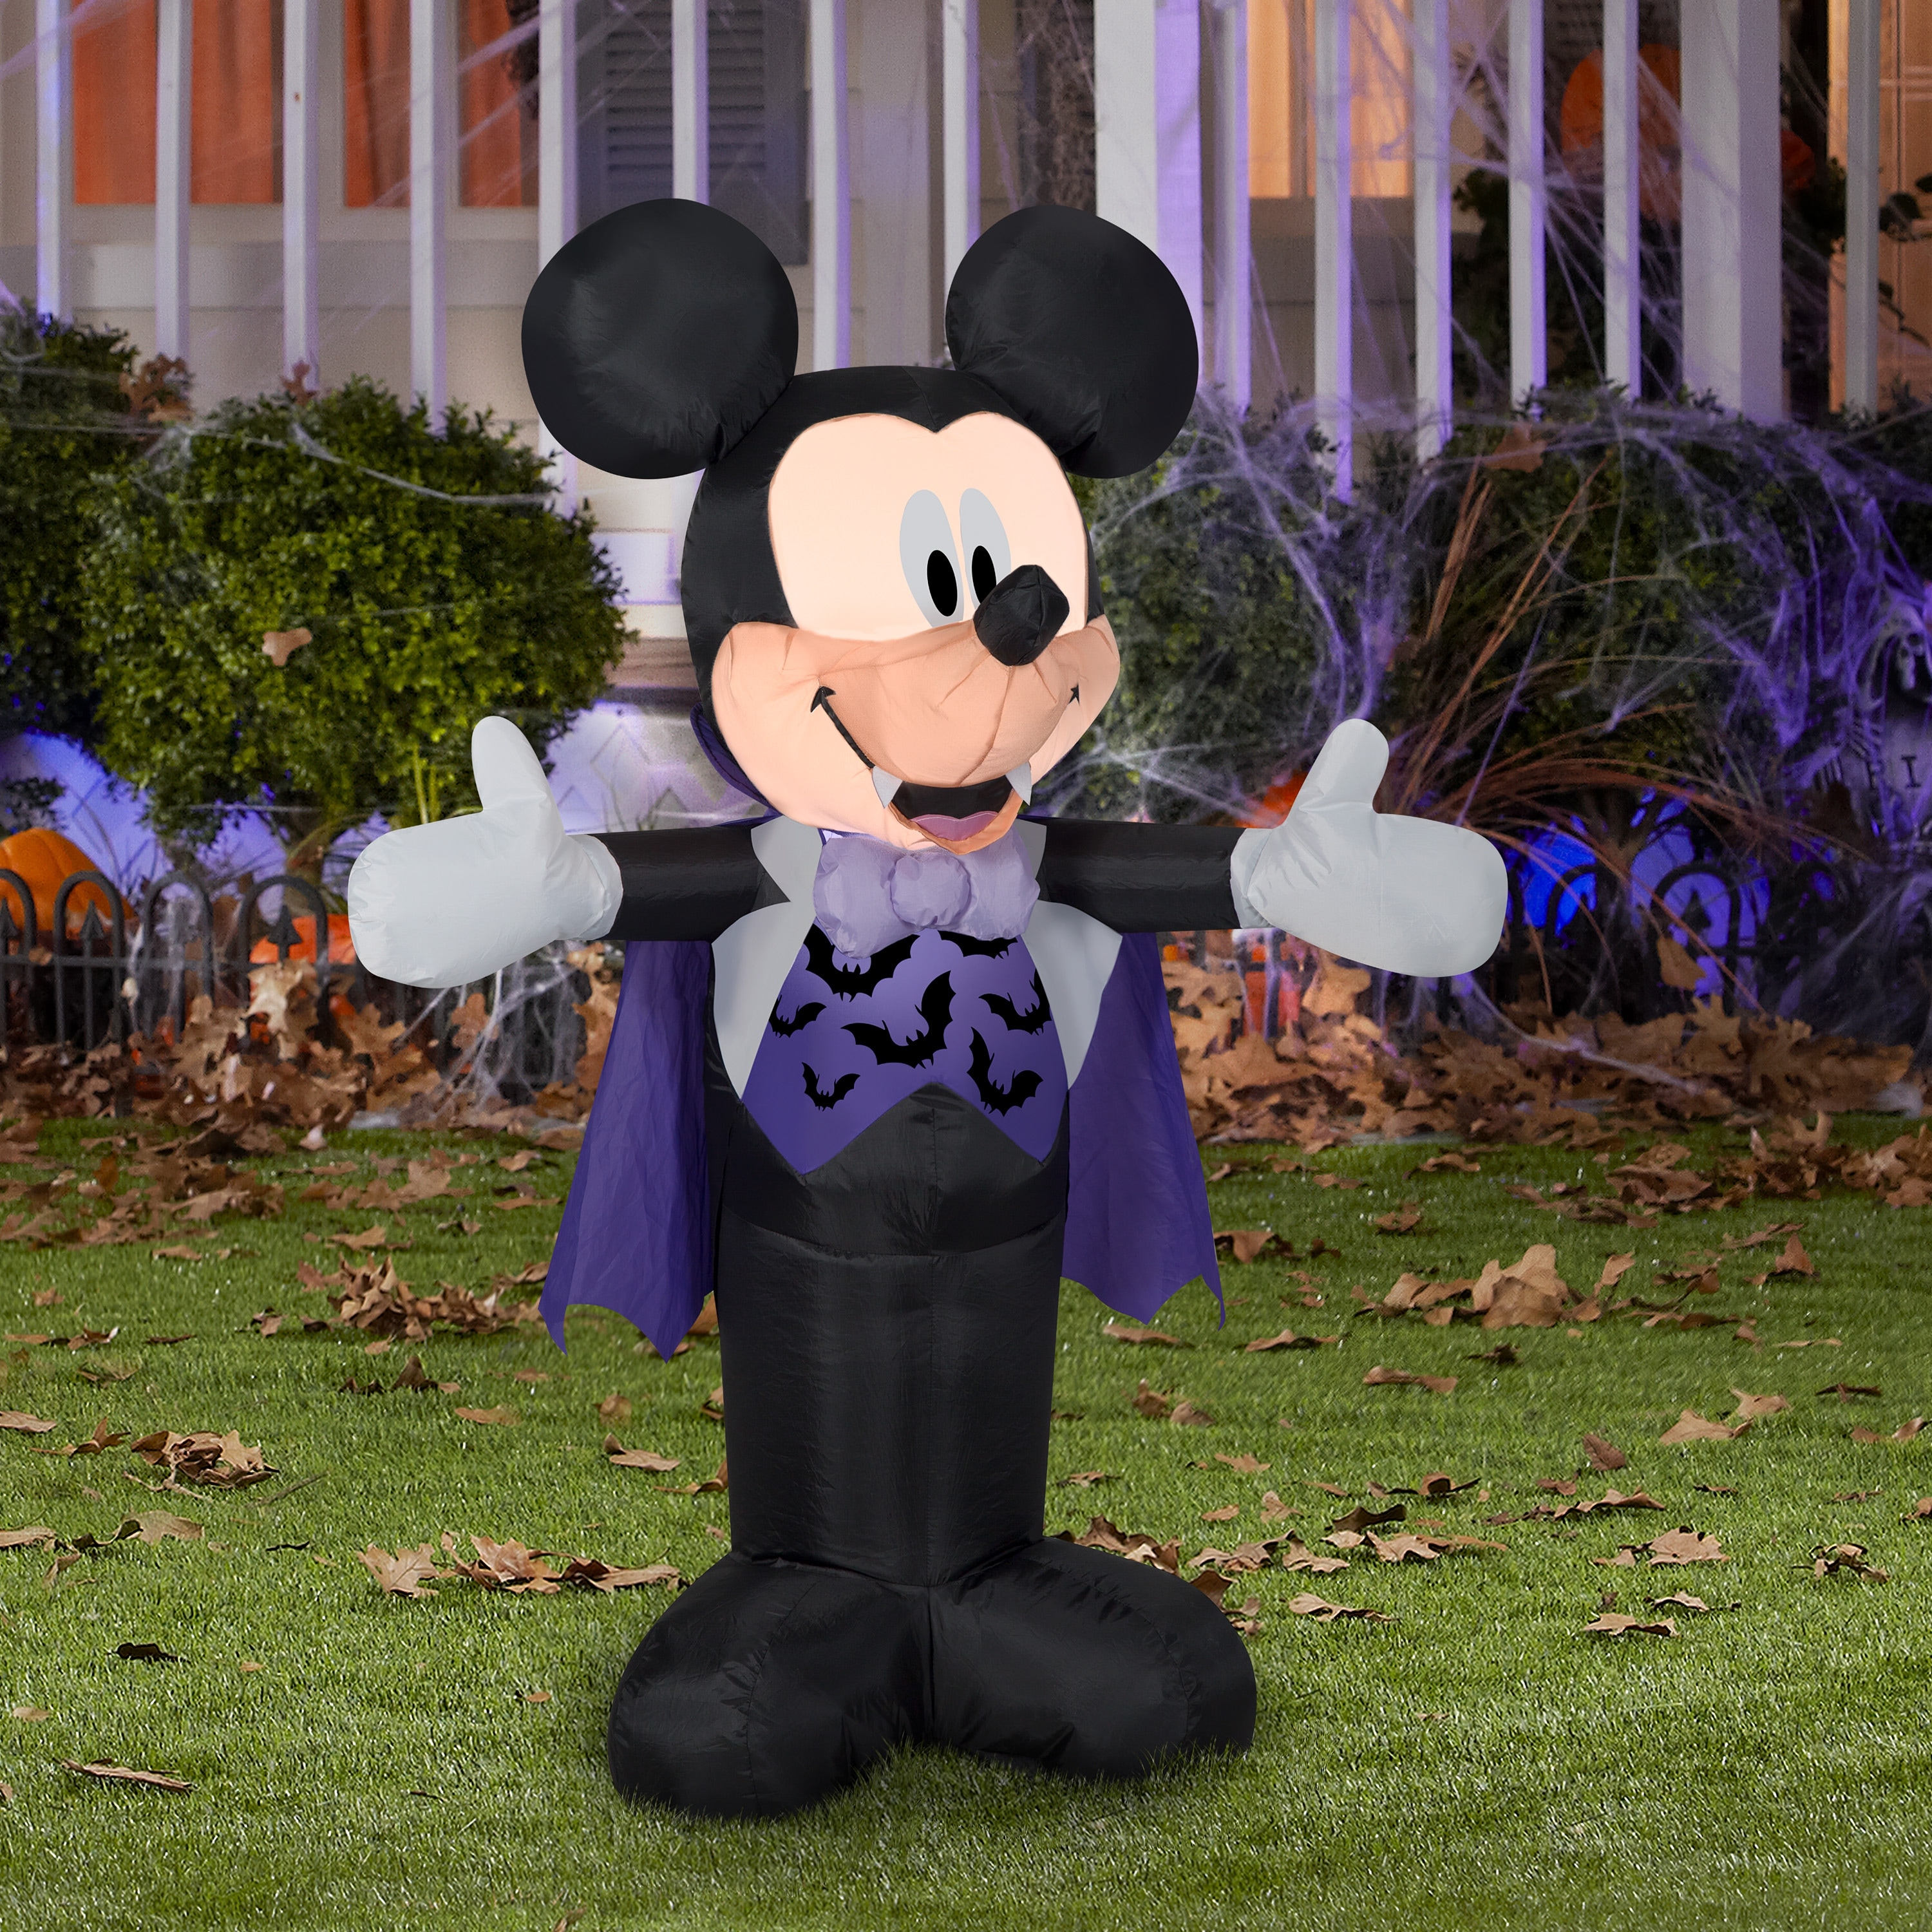 https://ak1.ostkcdn.com/images/products/is/images/direct/fde4b7fac3a7e7dfcbdef98d250f7e6f6d6f3995/Gemmy-Airblown-Mickey-in-Vampire-Costume-Disney-%2C-3.5-ft-Tall%2C-Multicolored.jpg